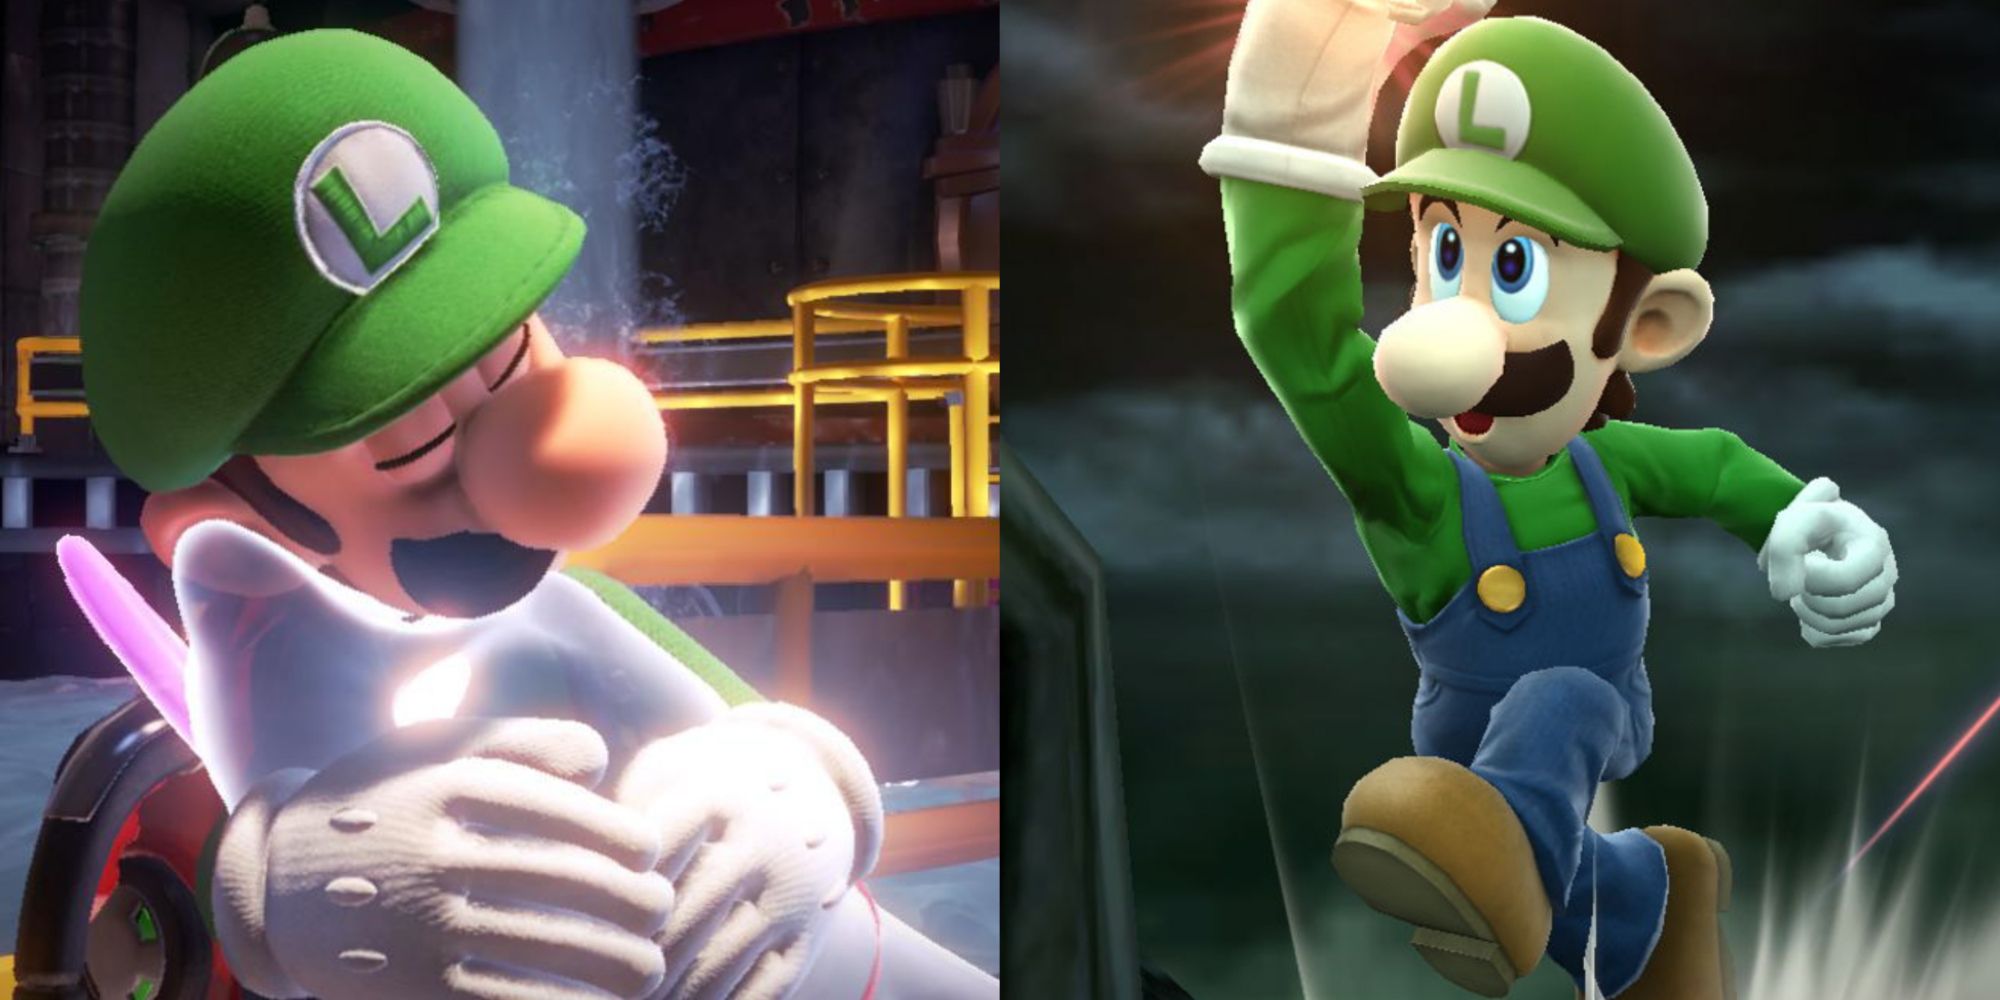 Split image of Luigi hugging Polterpup and performing a high jump in various Nintendo games